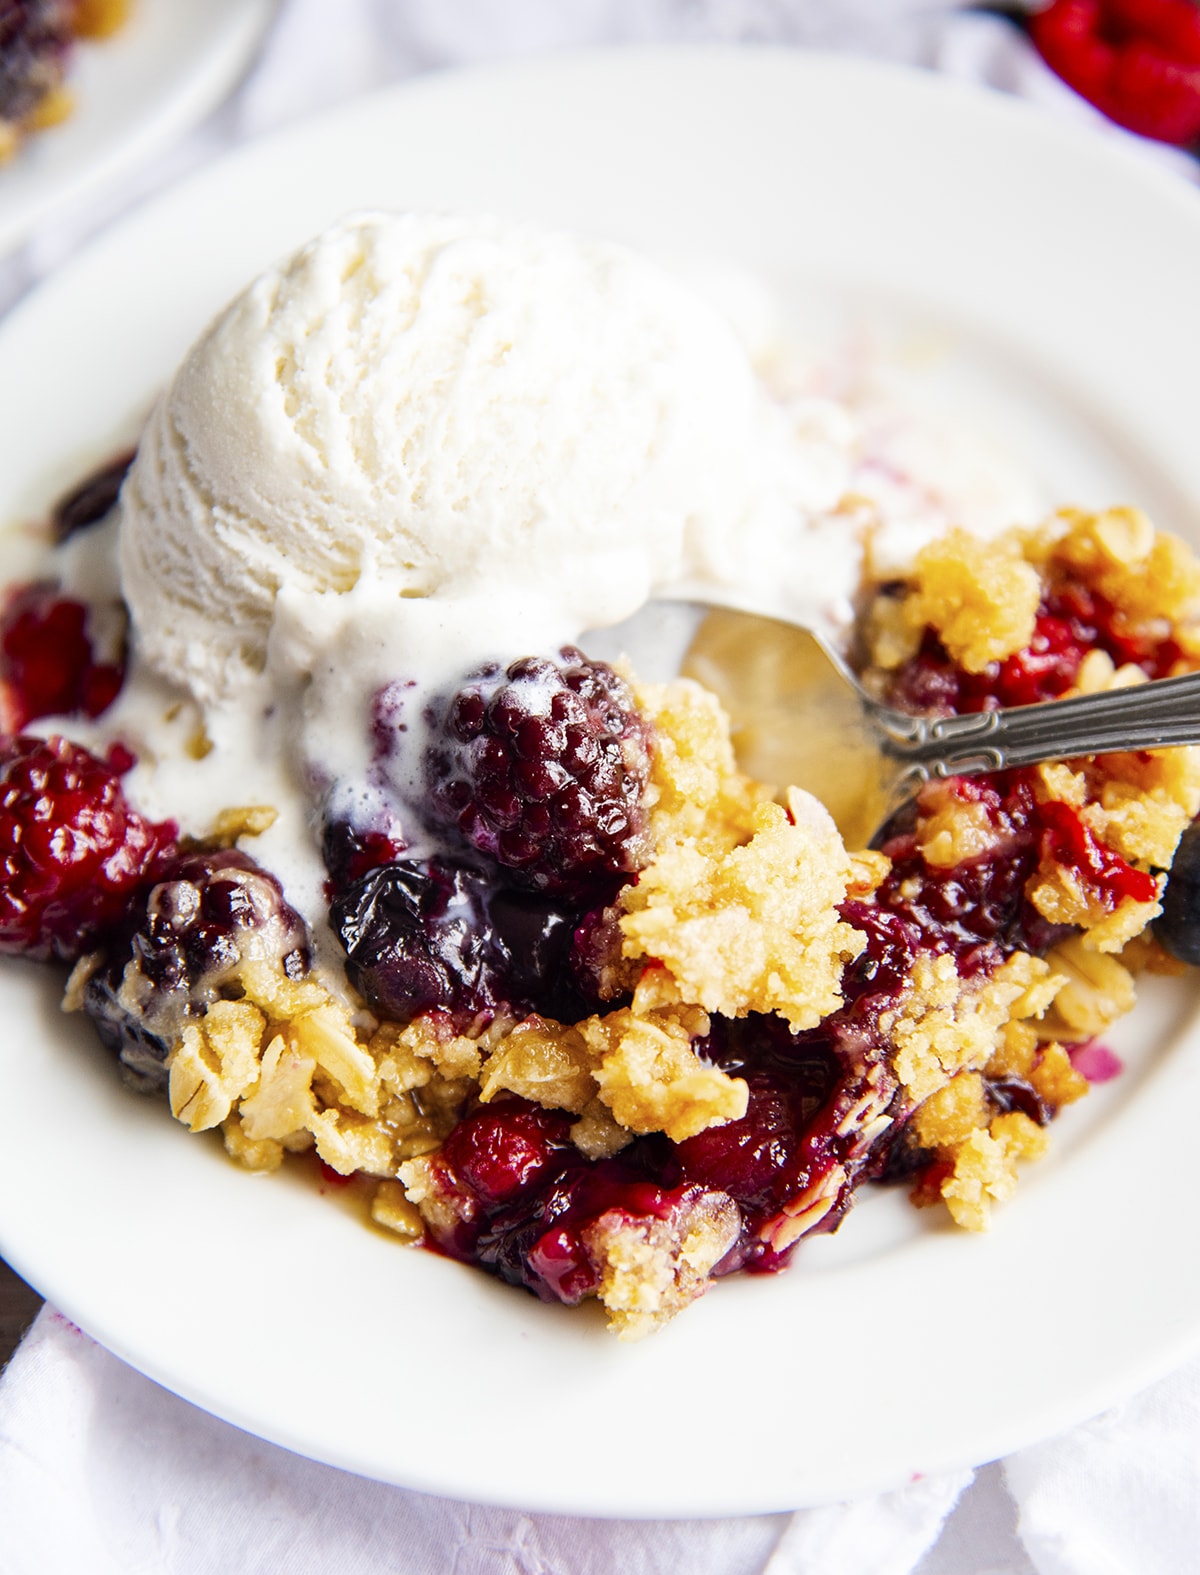 A plate of berry crisp with ice cream on top, and a spoon in it.